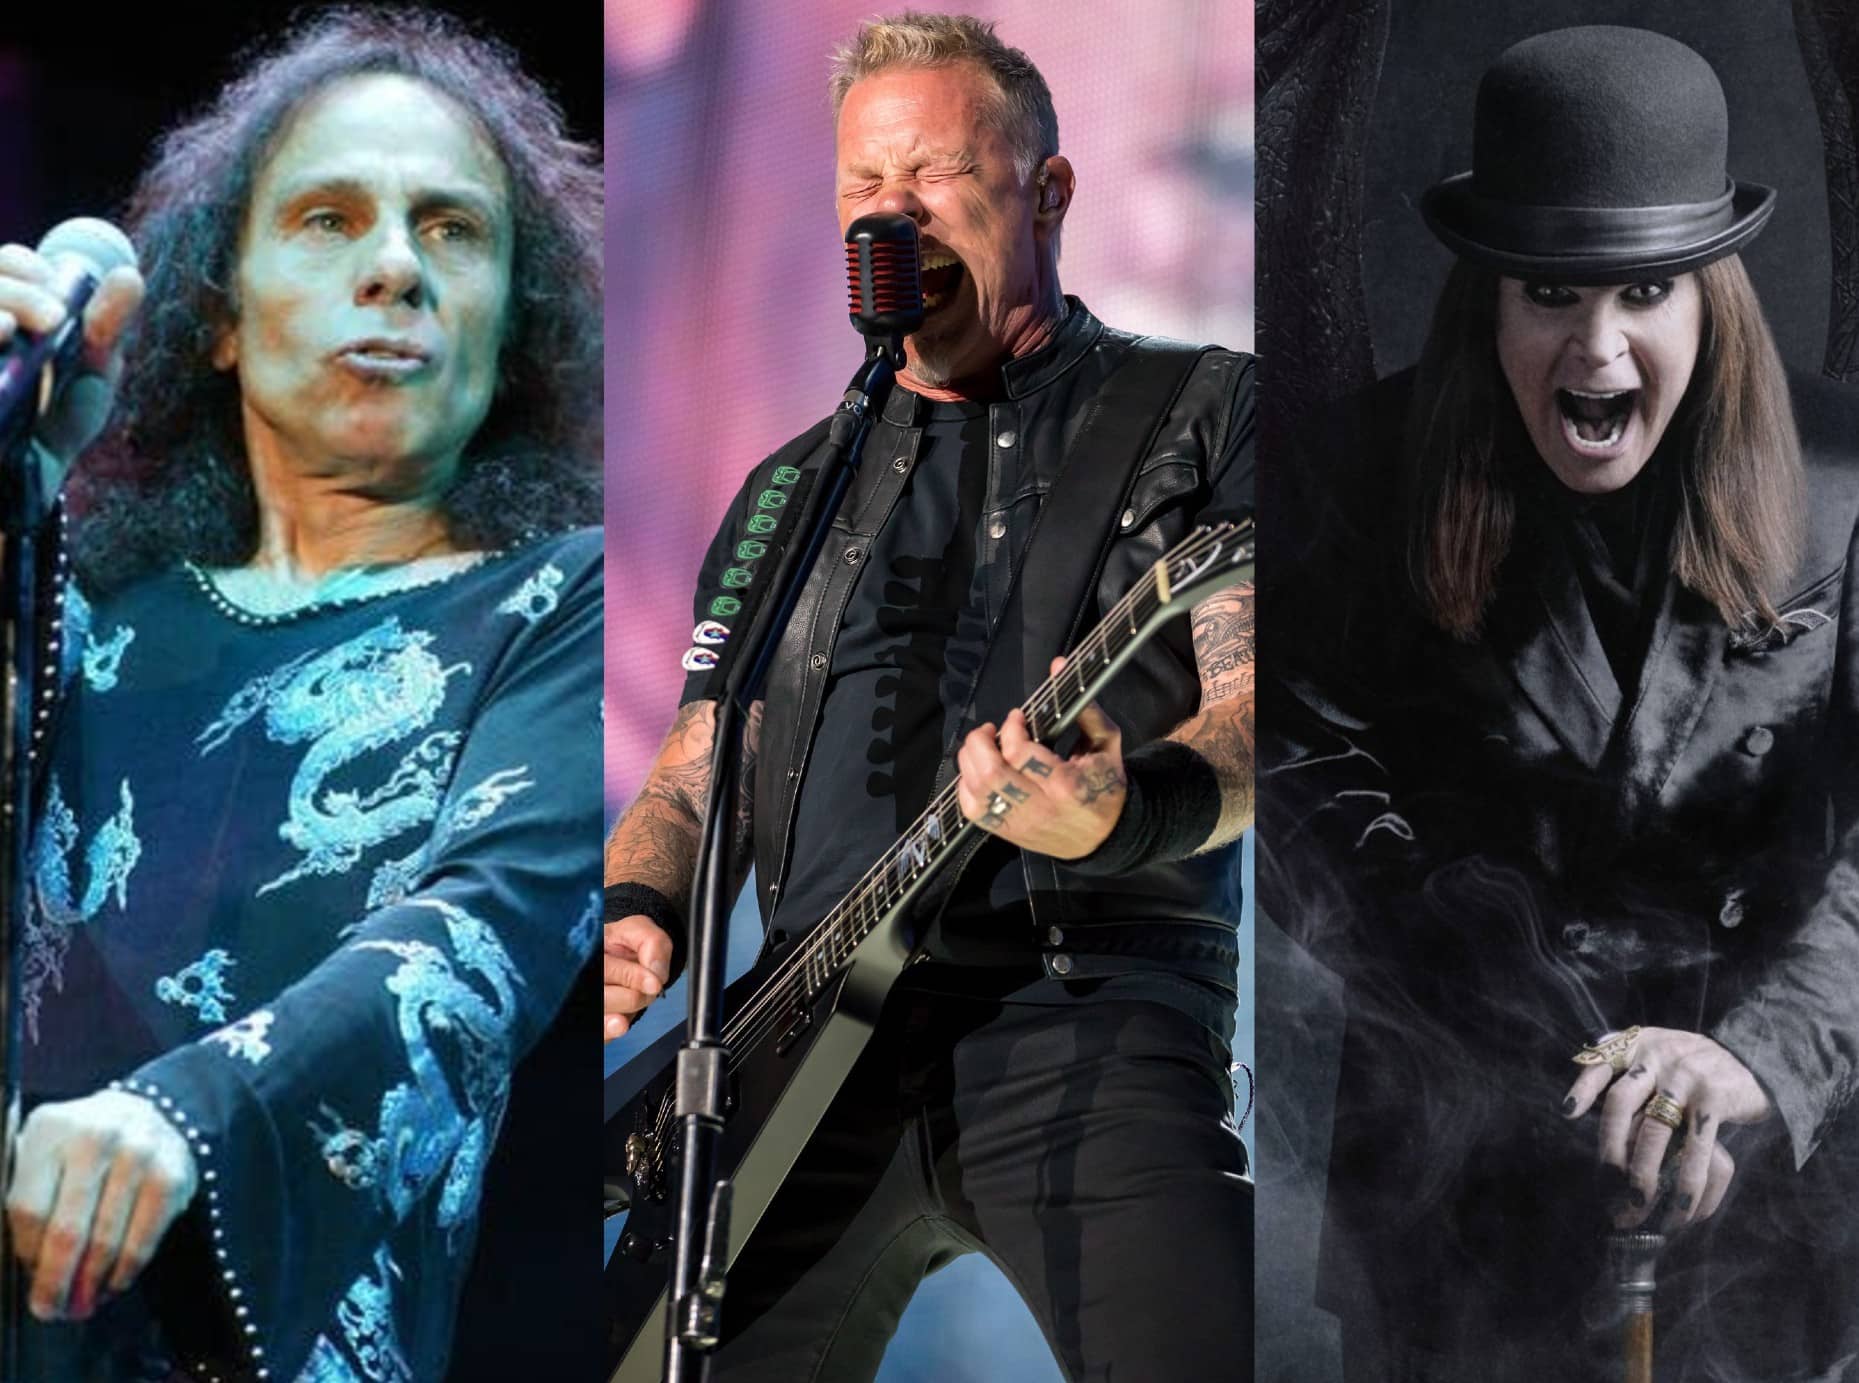 who is the best heavy metal band, VOTE HERE: Who Do YOU Think Are The Most Influential HEAVY METAL BANDS Of All Time?